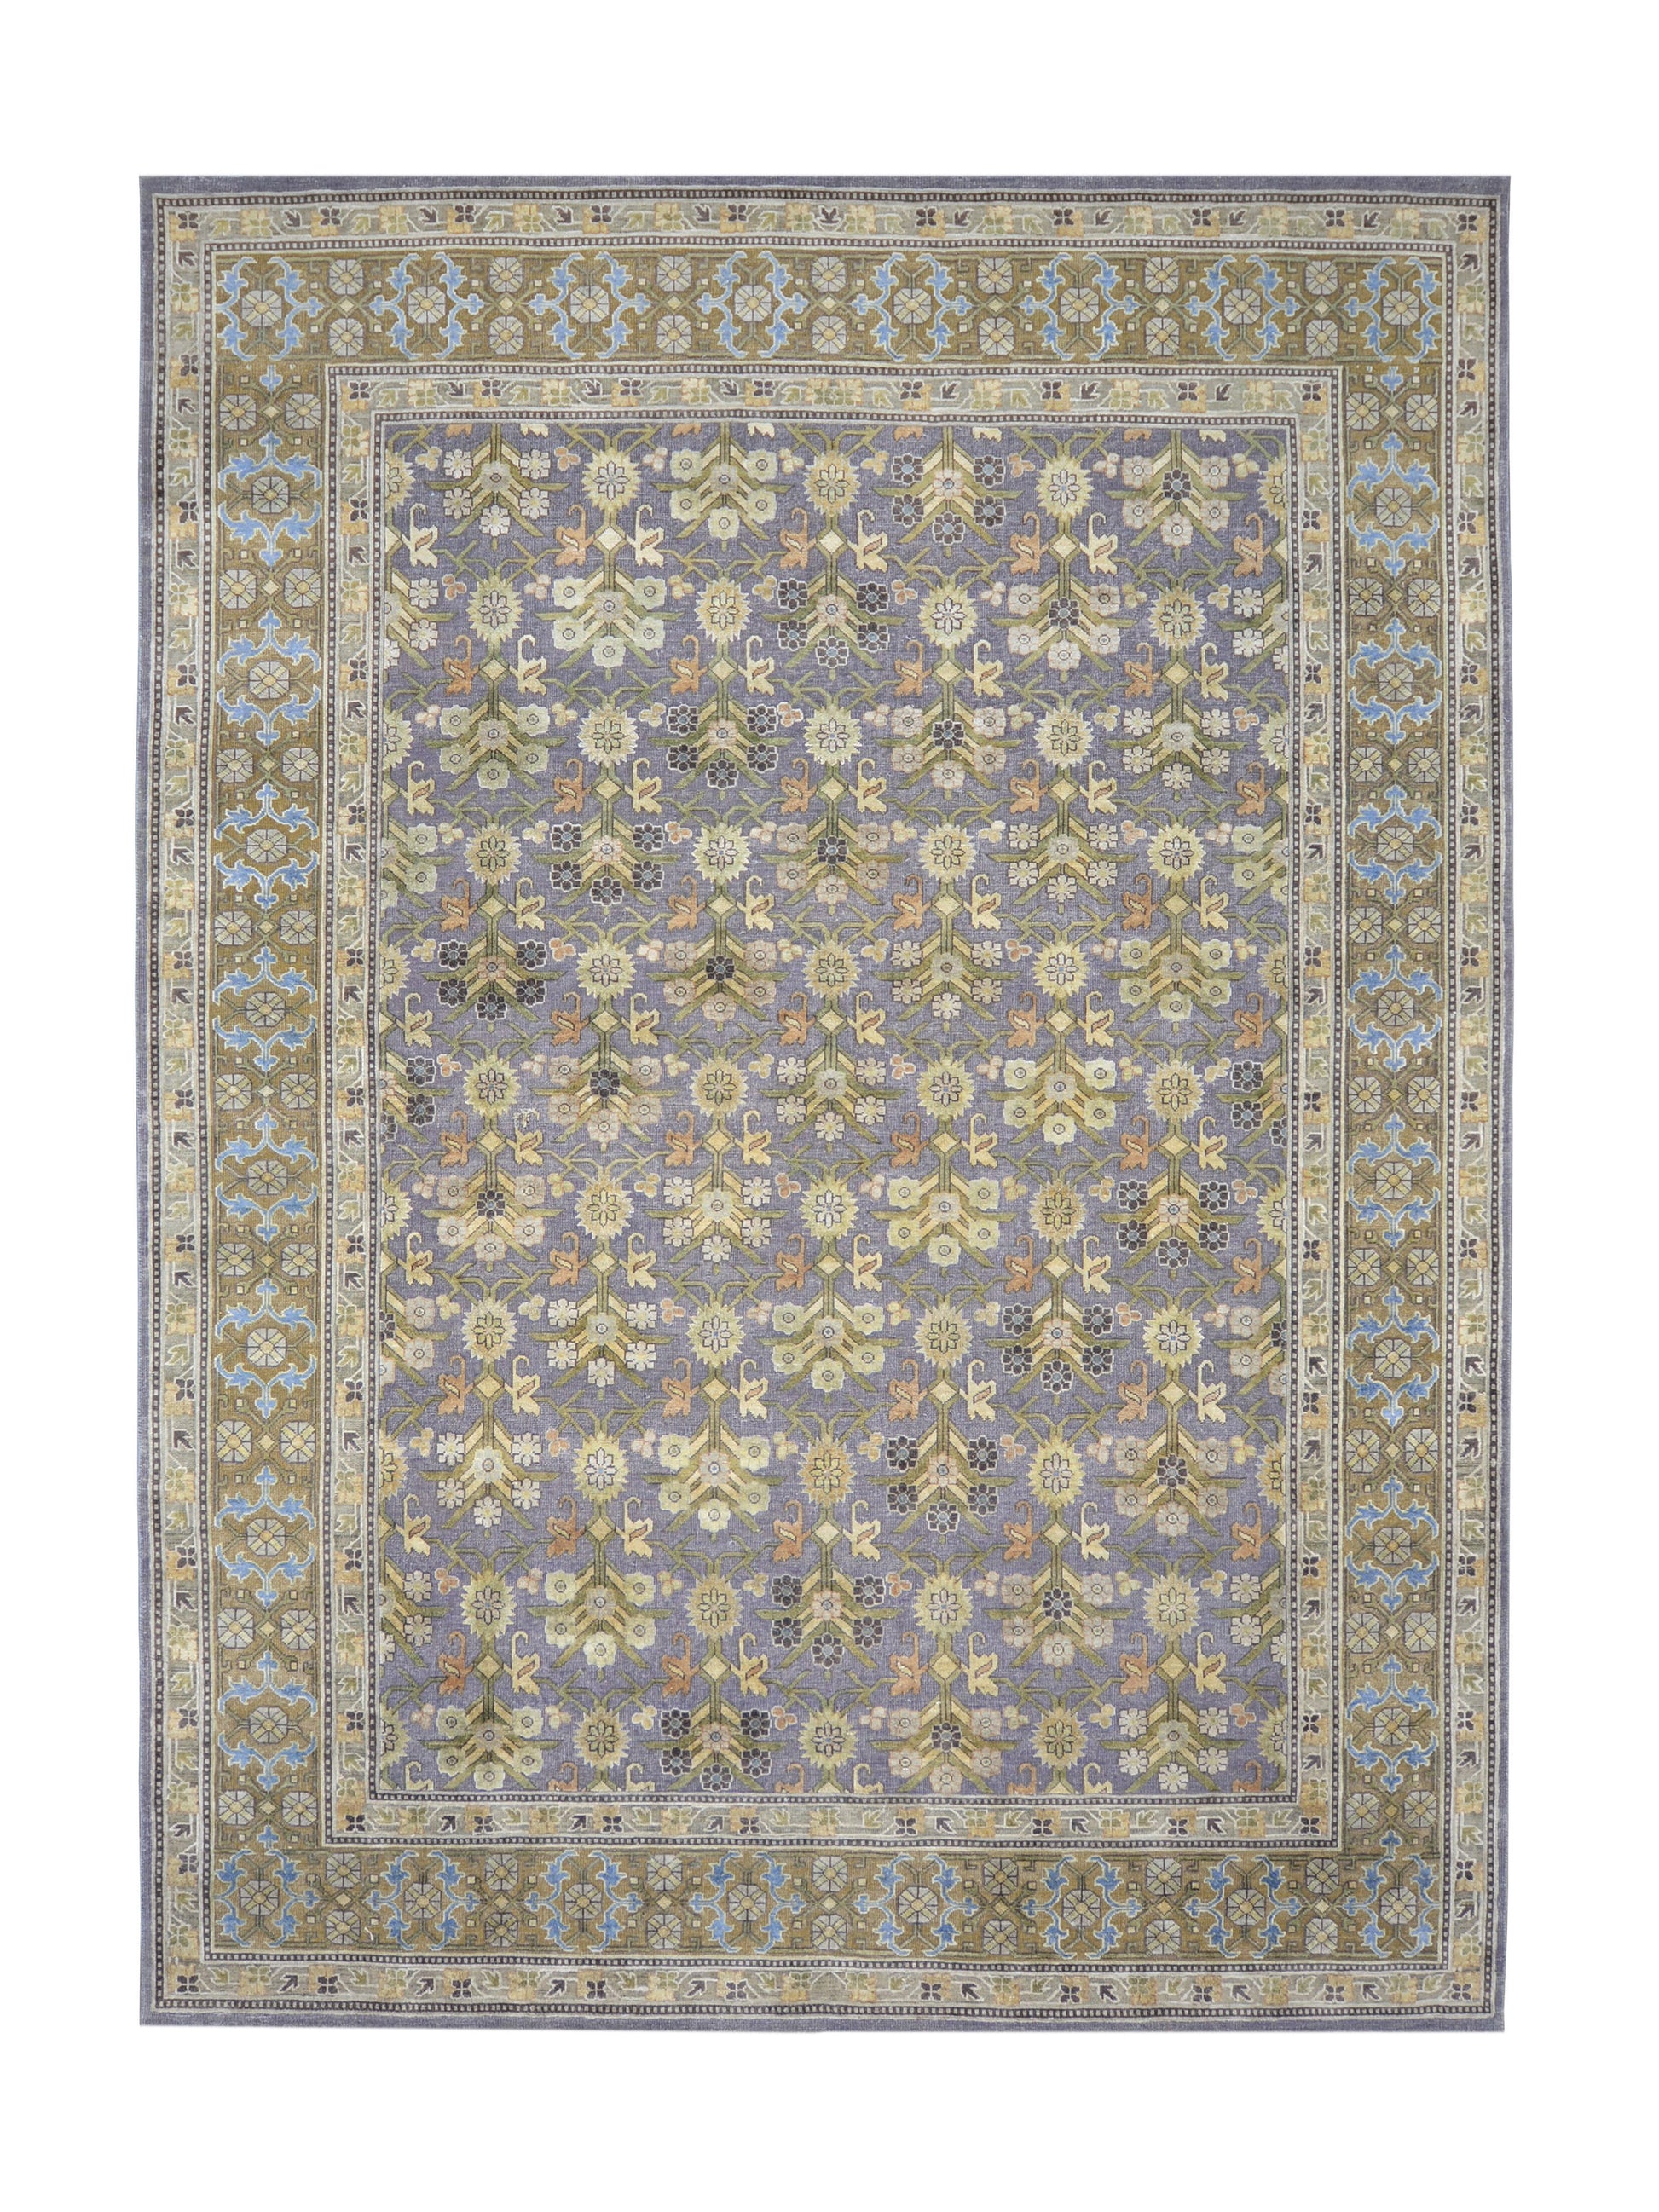 Get trendy with Garden Lavender, Camel, Ivory and Multy Pure Silk Transitional Geometrical Handknotted Area Rug 8.11x12.3ft 273x372Cms - Transitional Rugs available at Jaipur Oriental Rugs. Grab yours for $9830.00 today!